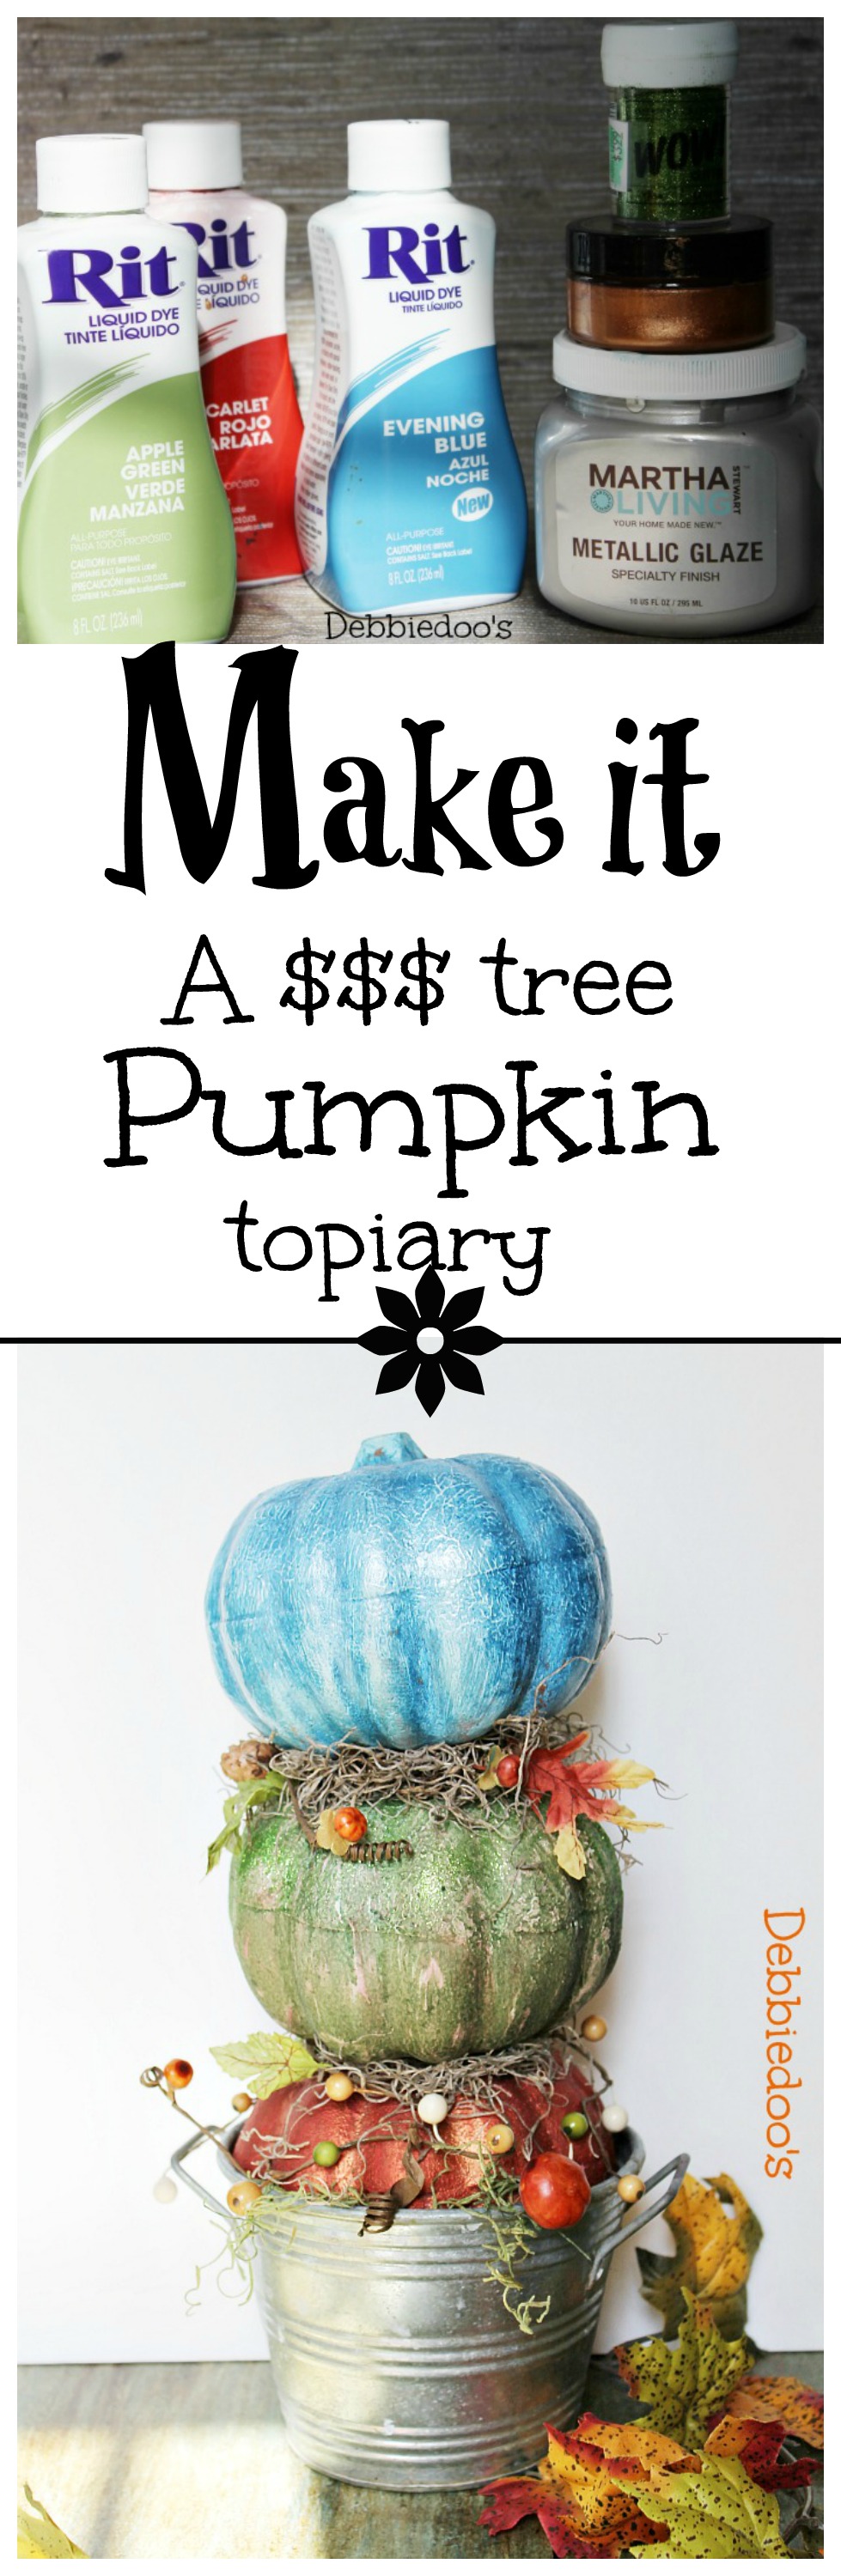 How to make a dollar tree pumpkin topiary and paint your pumpkins with rit dye